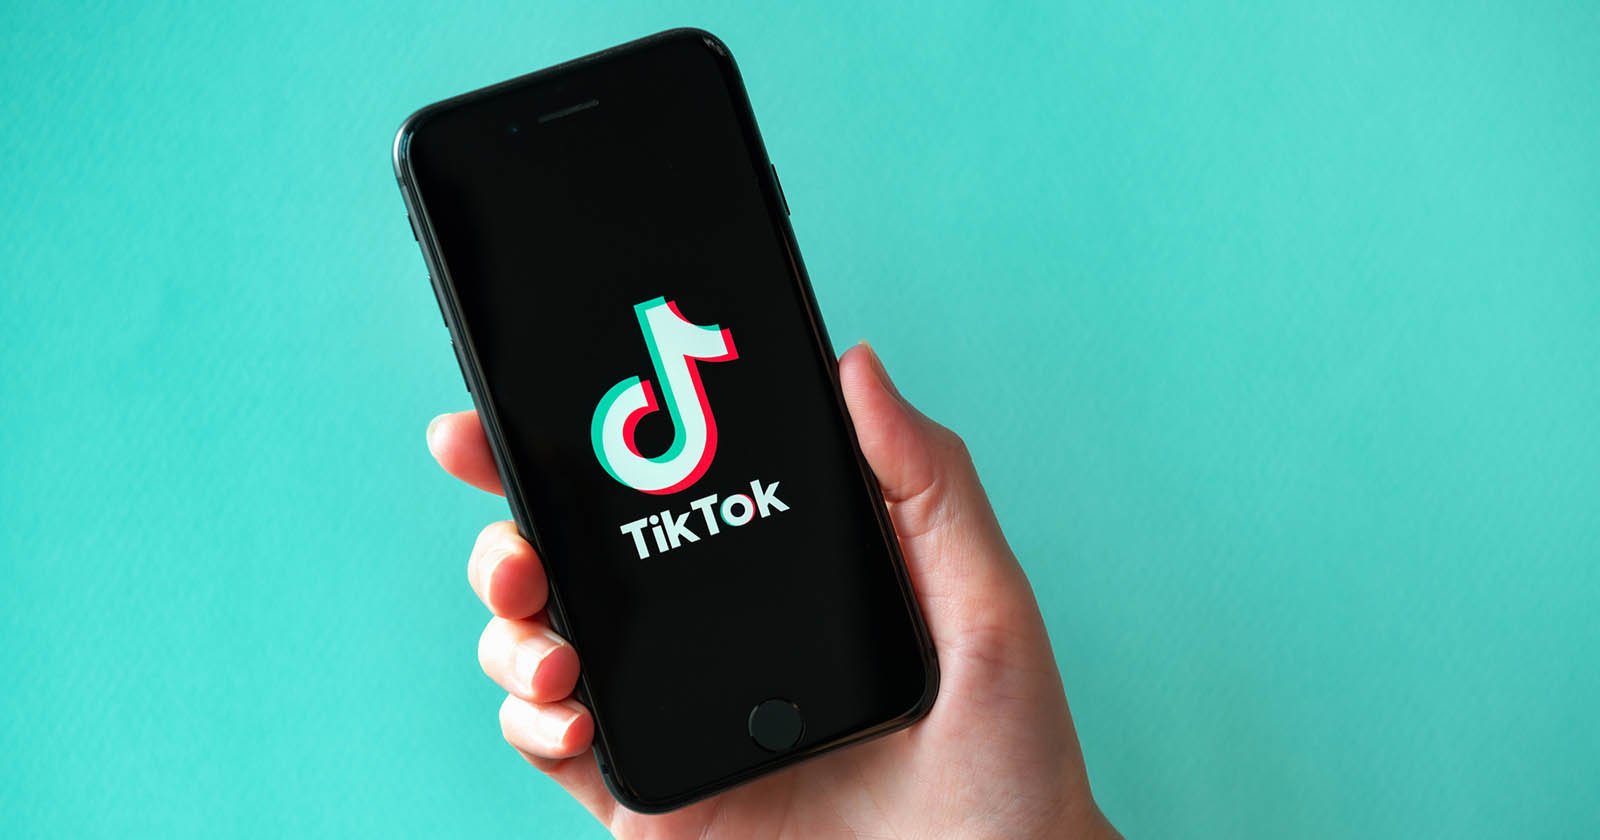 US House of Representatives Bans TikTok on Official Devices